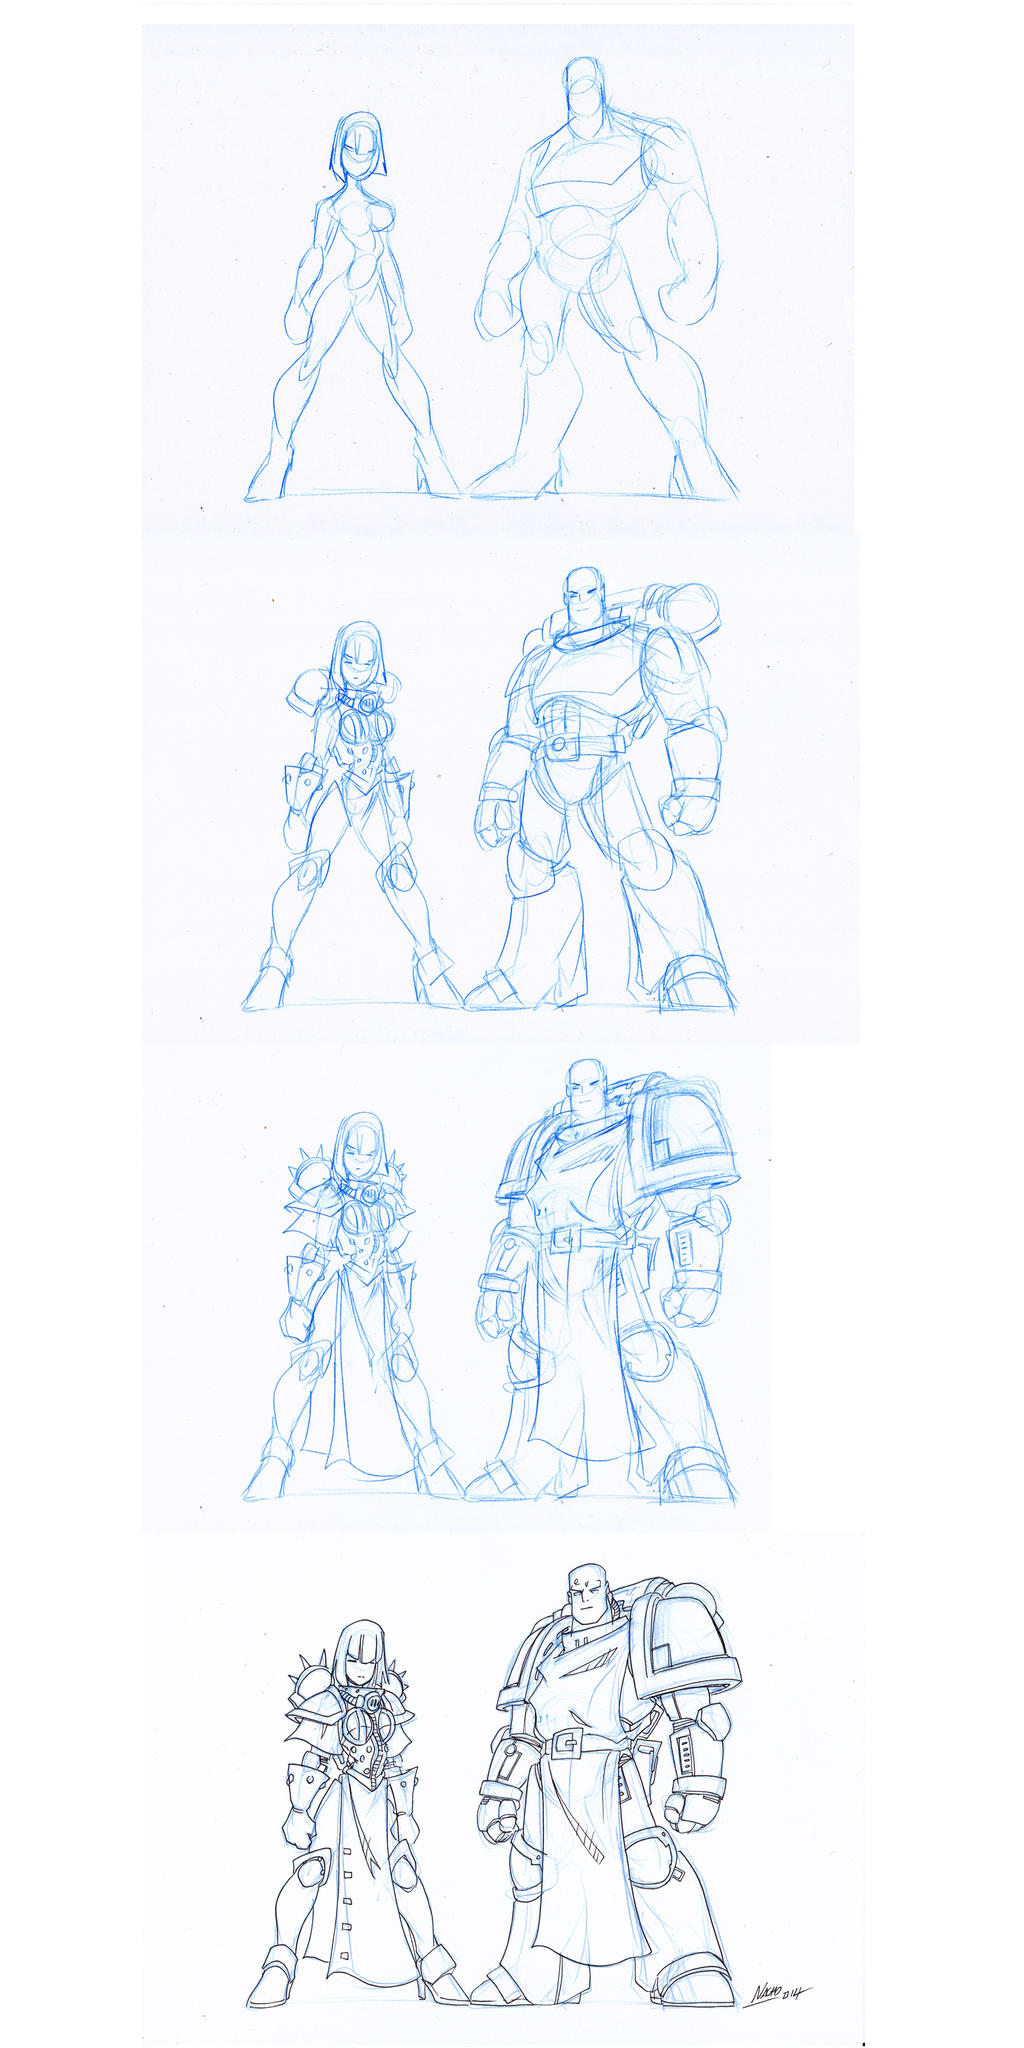 Space Marine and Sister drawing process by NachoMon on DeviantArt